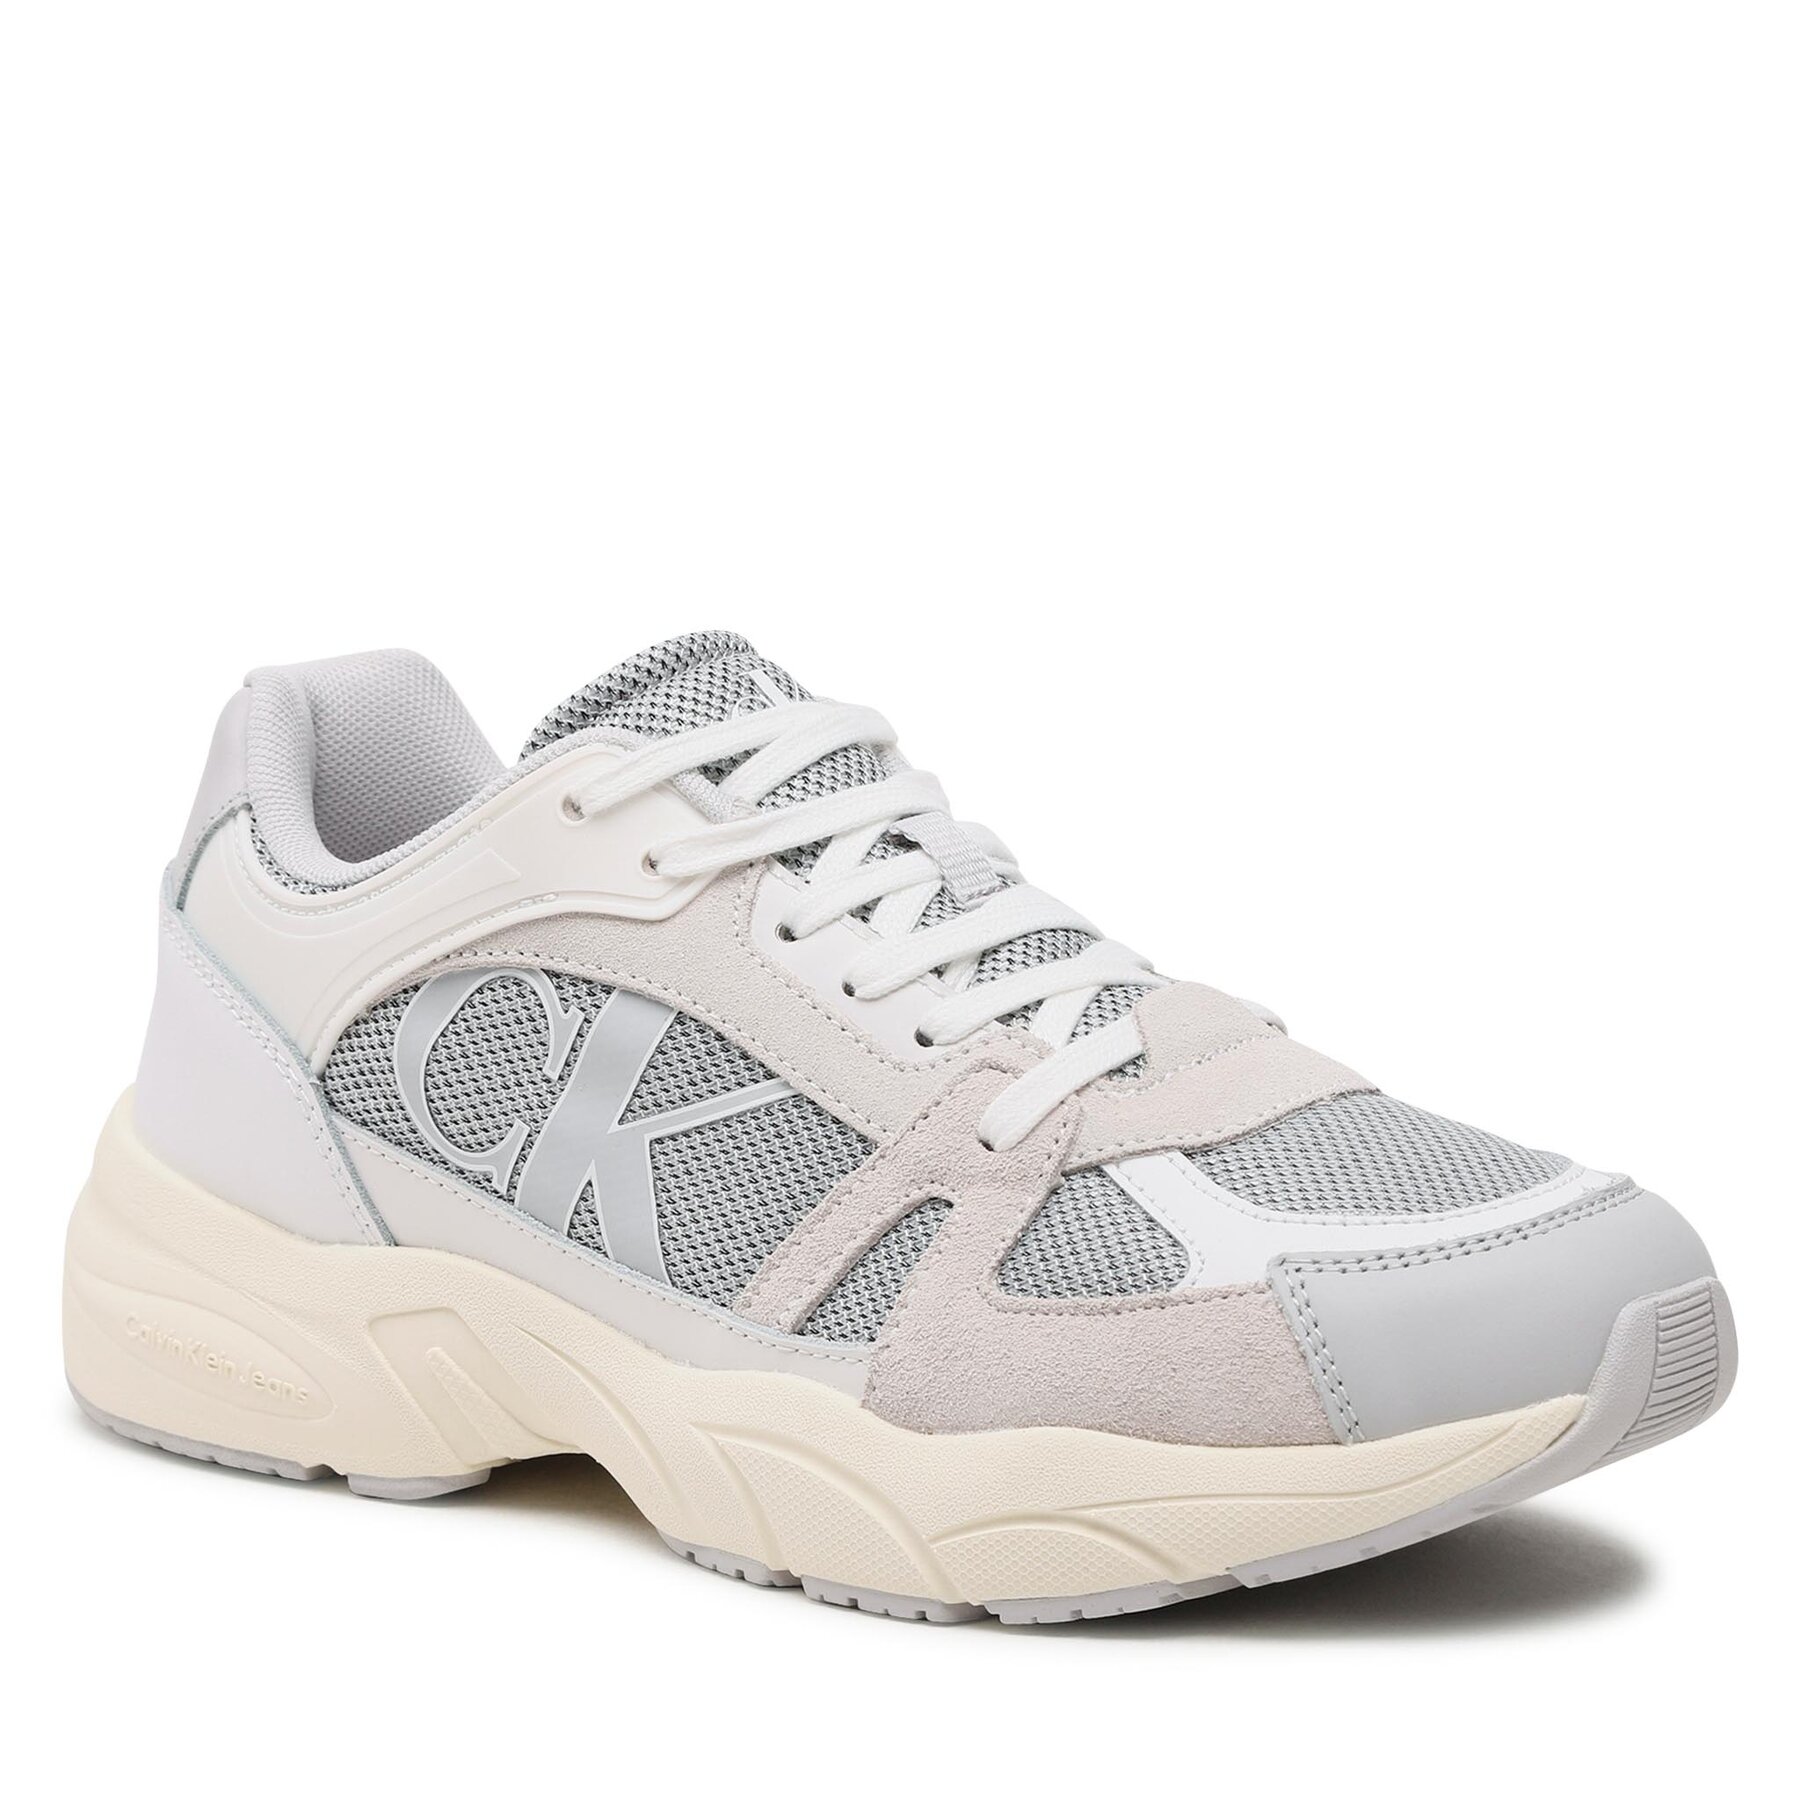 Sneakers Calvin Klein Jeans Retro Tennis Laceup Mix Lth YM0YM00696 Oyster Mushroom PSX Calvin imagine 2022 reducere